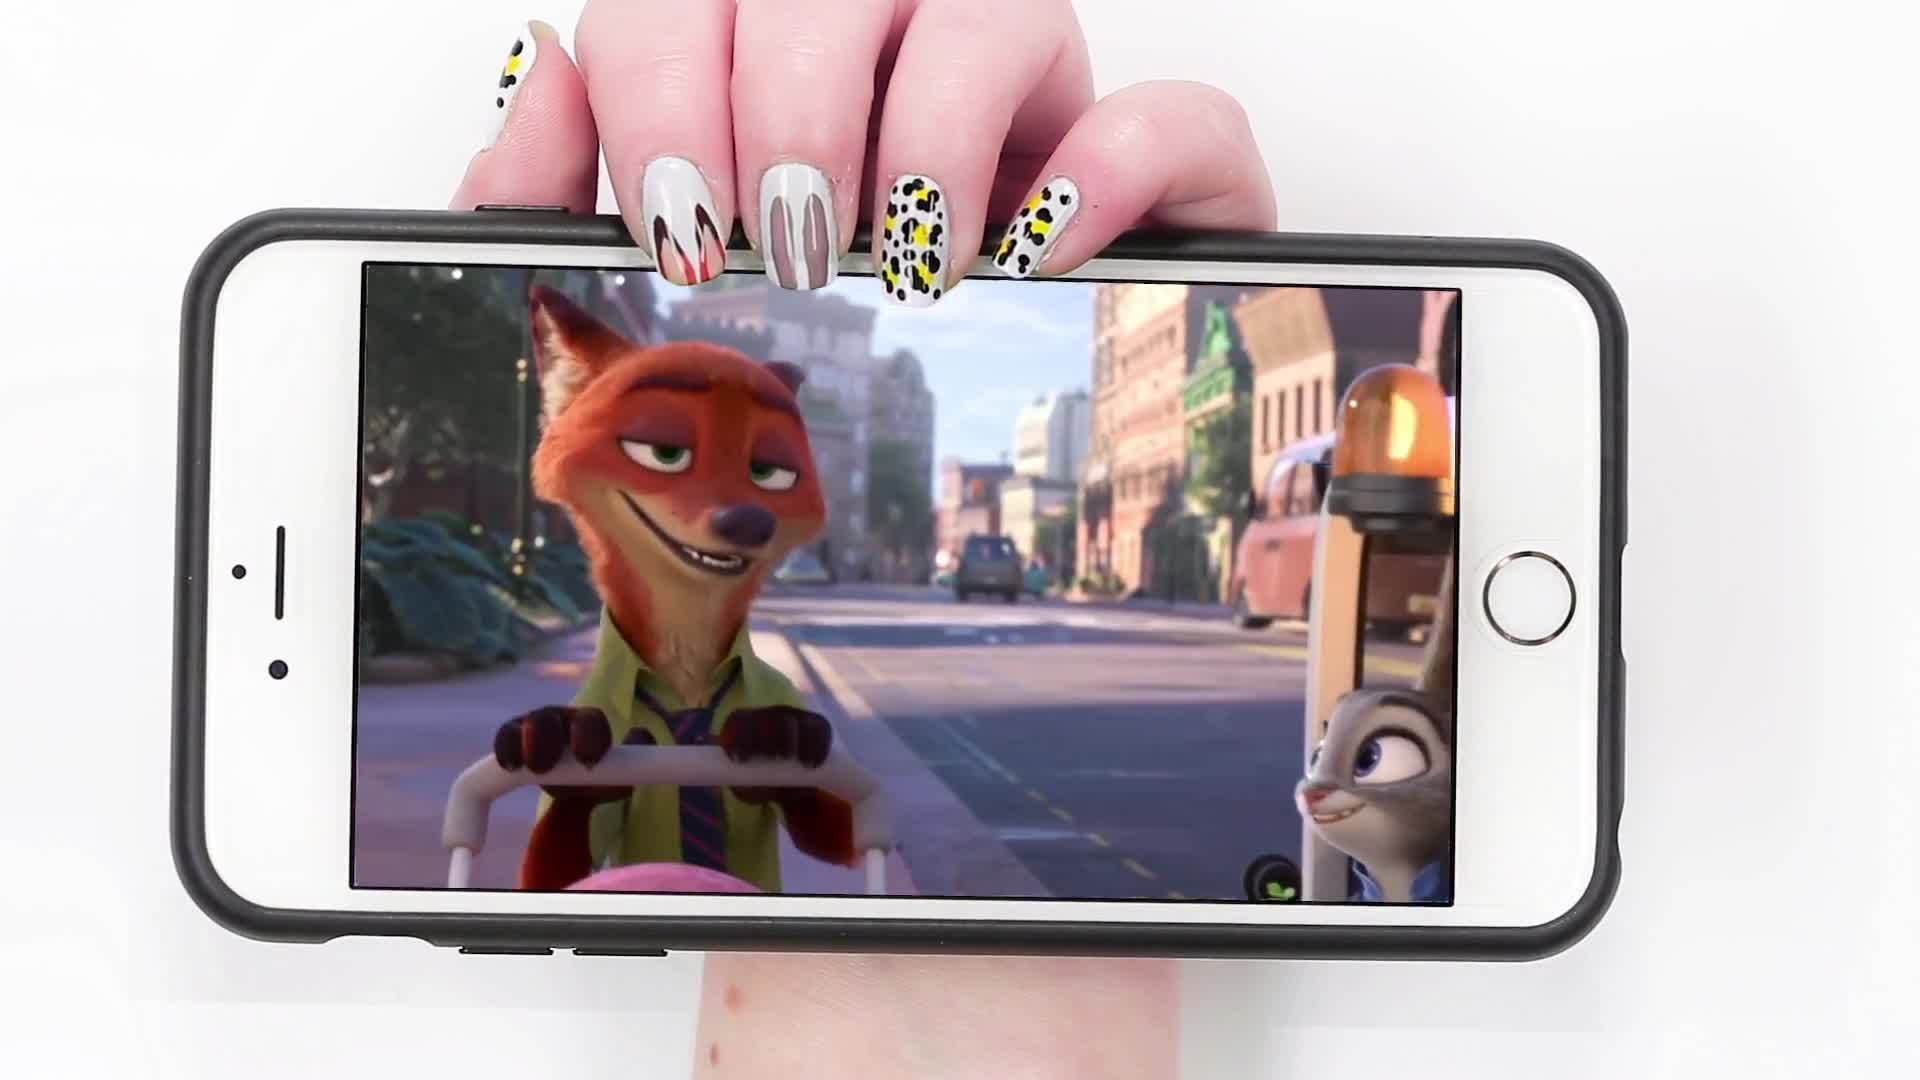 3 Zootopia Nails To Bring Out Your Spirit Animal